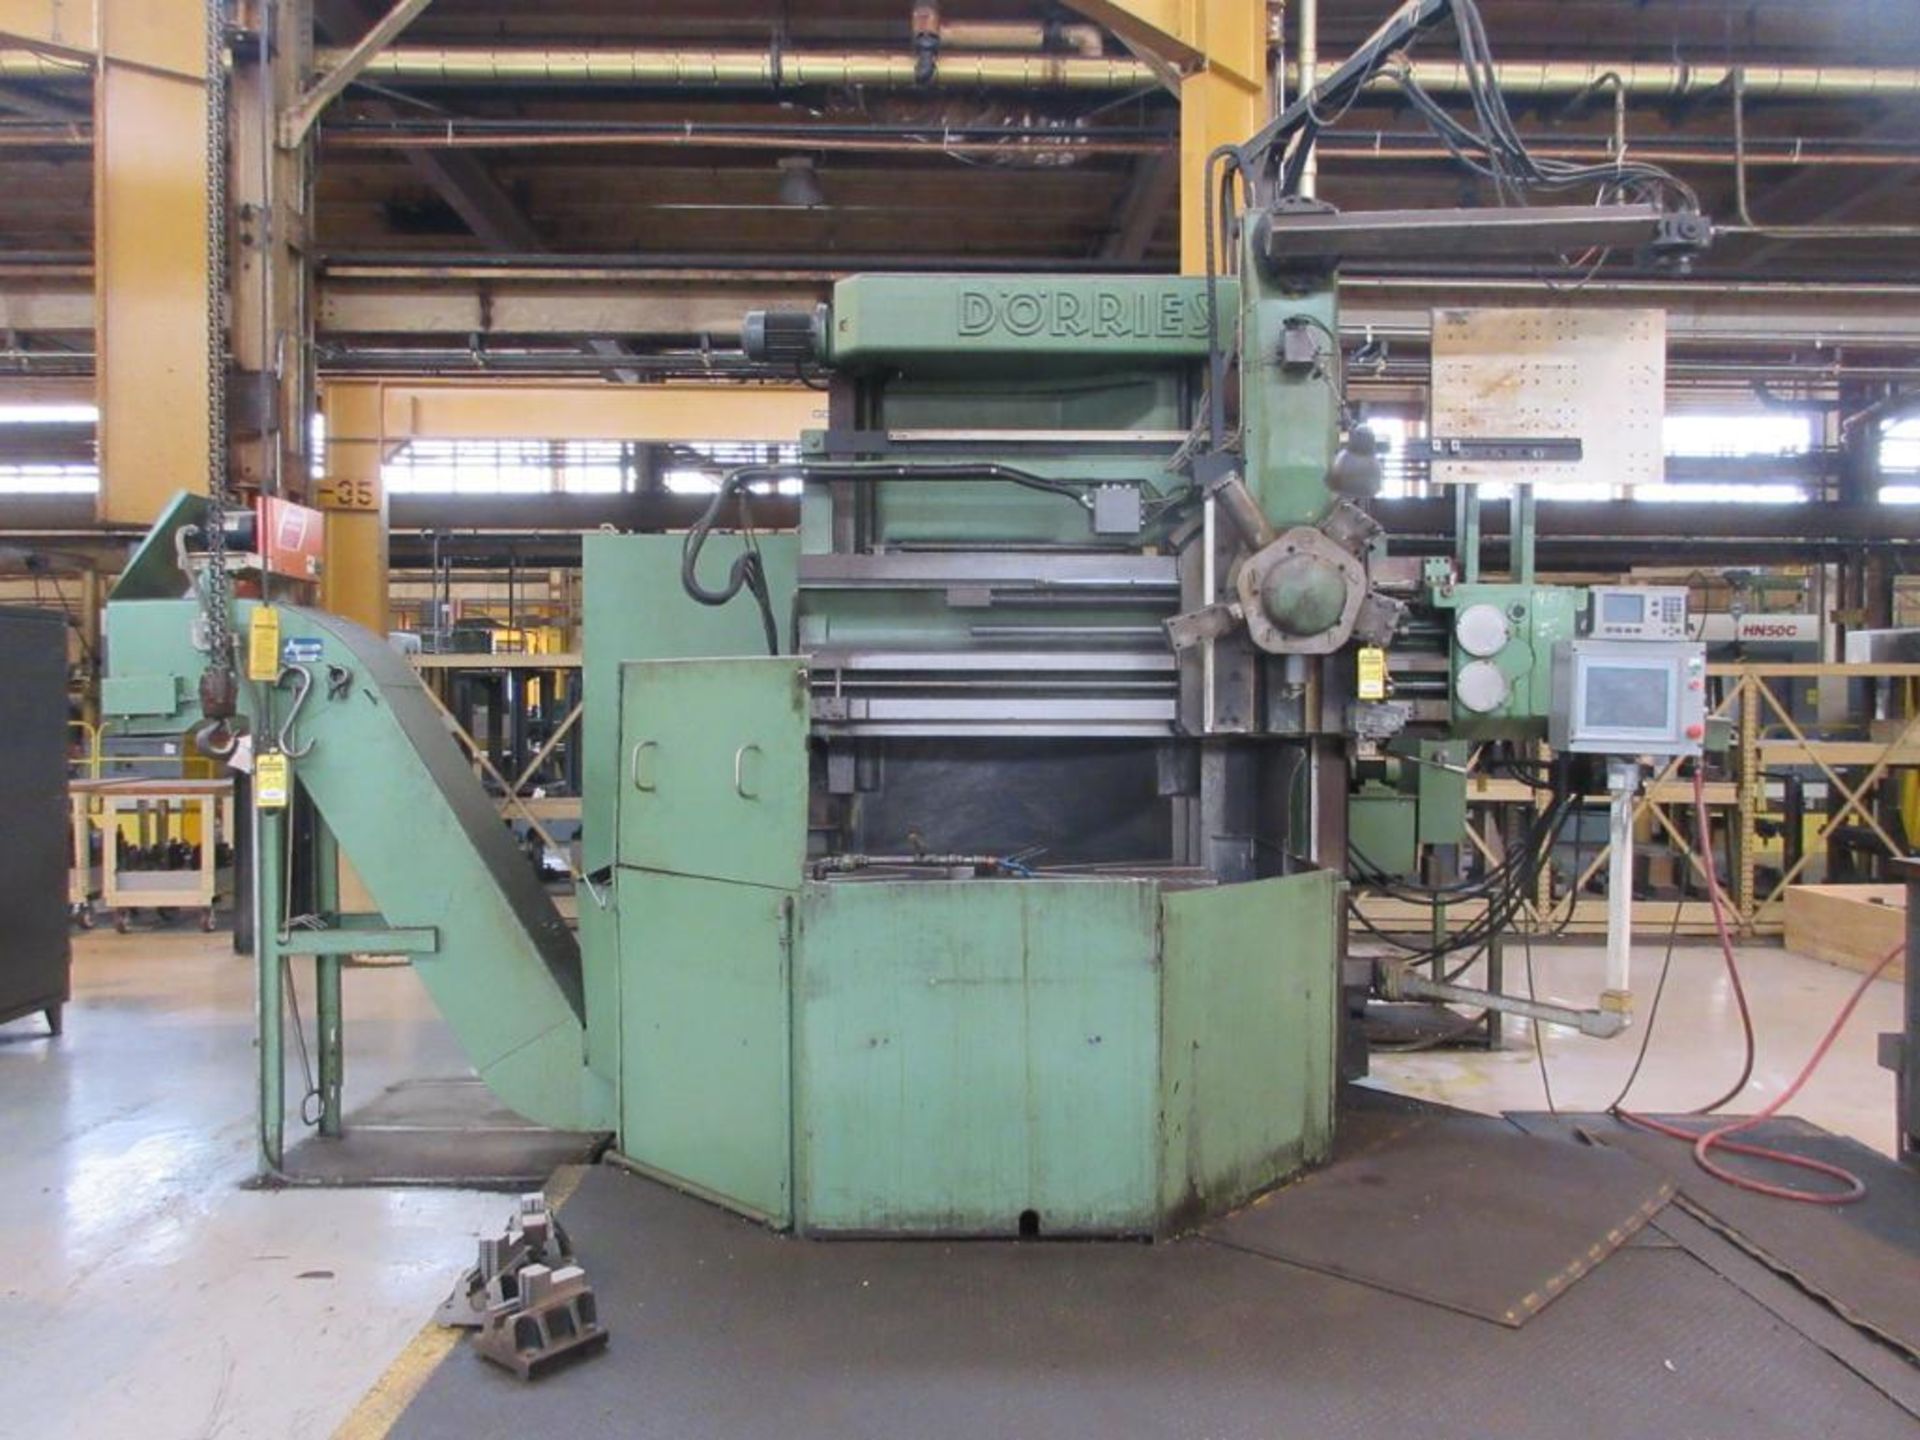 D'ORRIES 63 IN. VERTICAL TURNING LATHE, 5-STATION TURRET, ACU-RITE D.R.O., OUTFEED CHIP CONVEYOR,